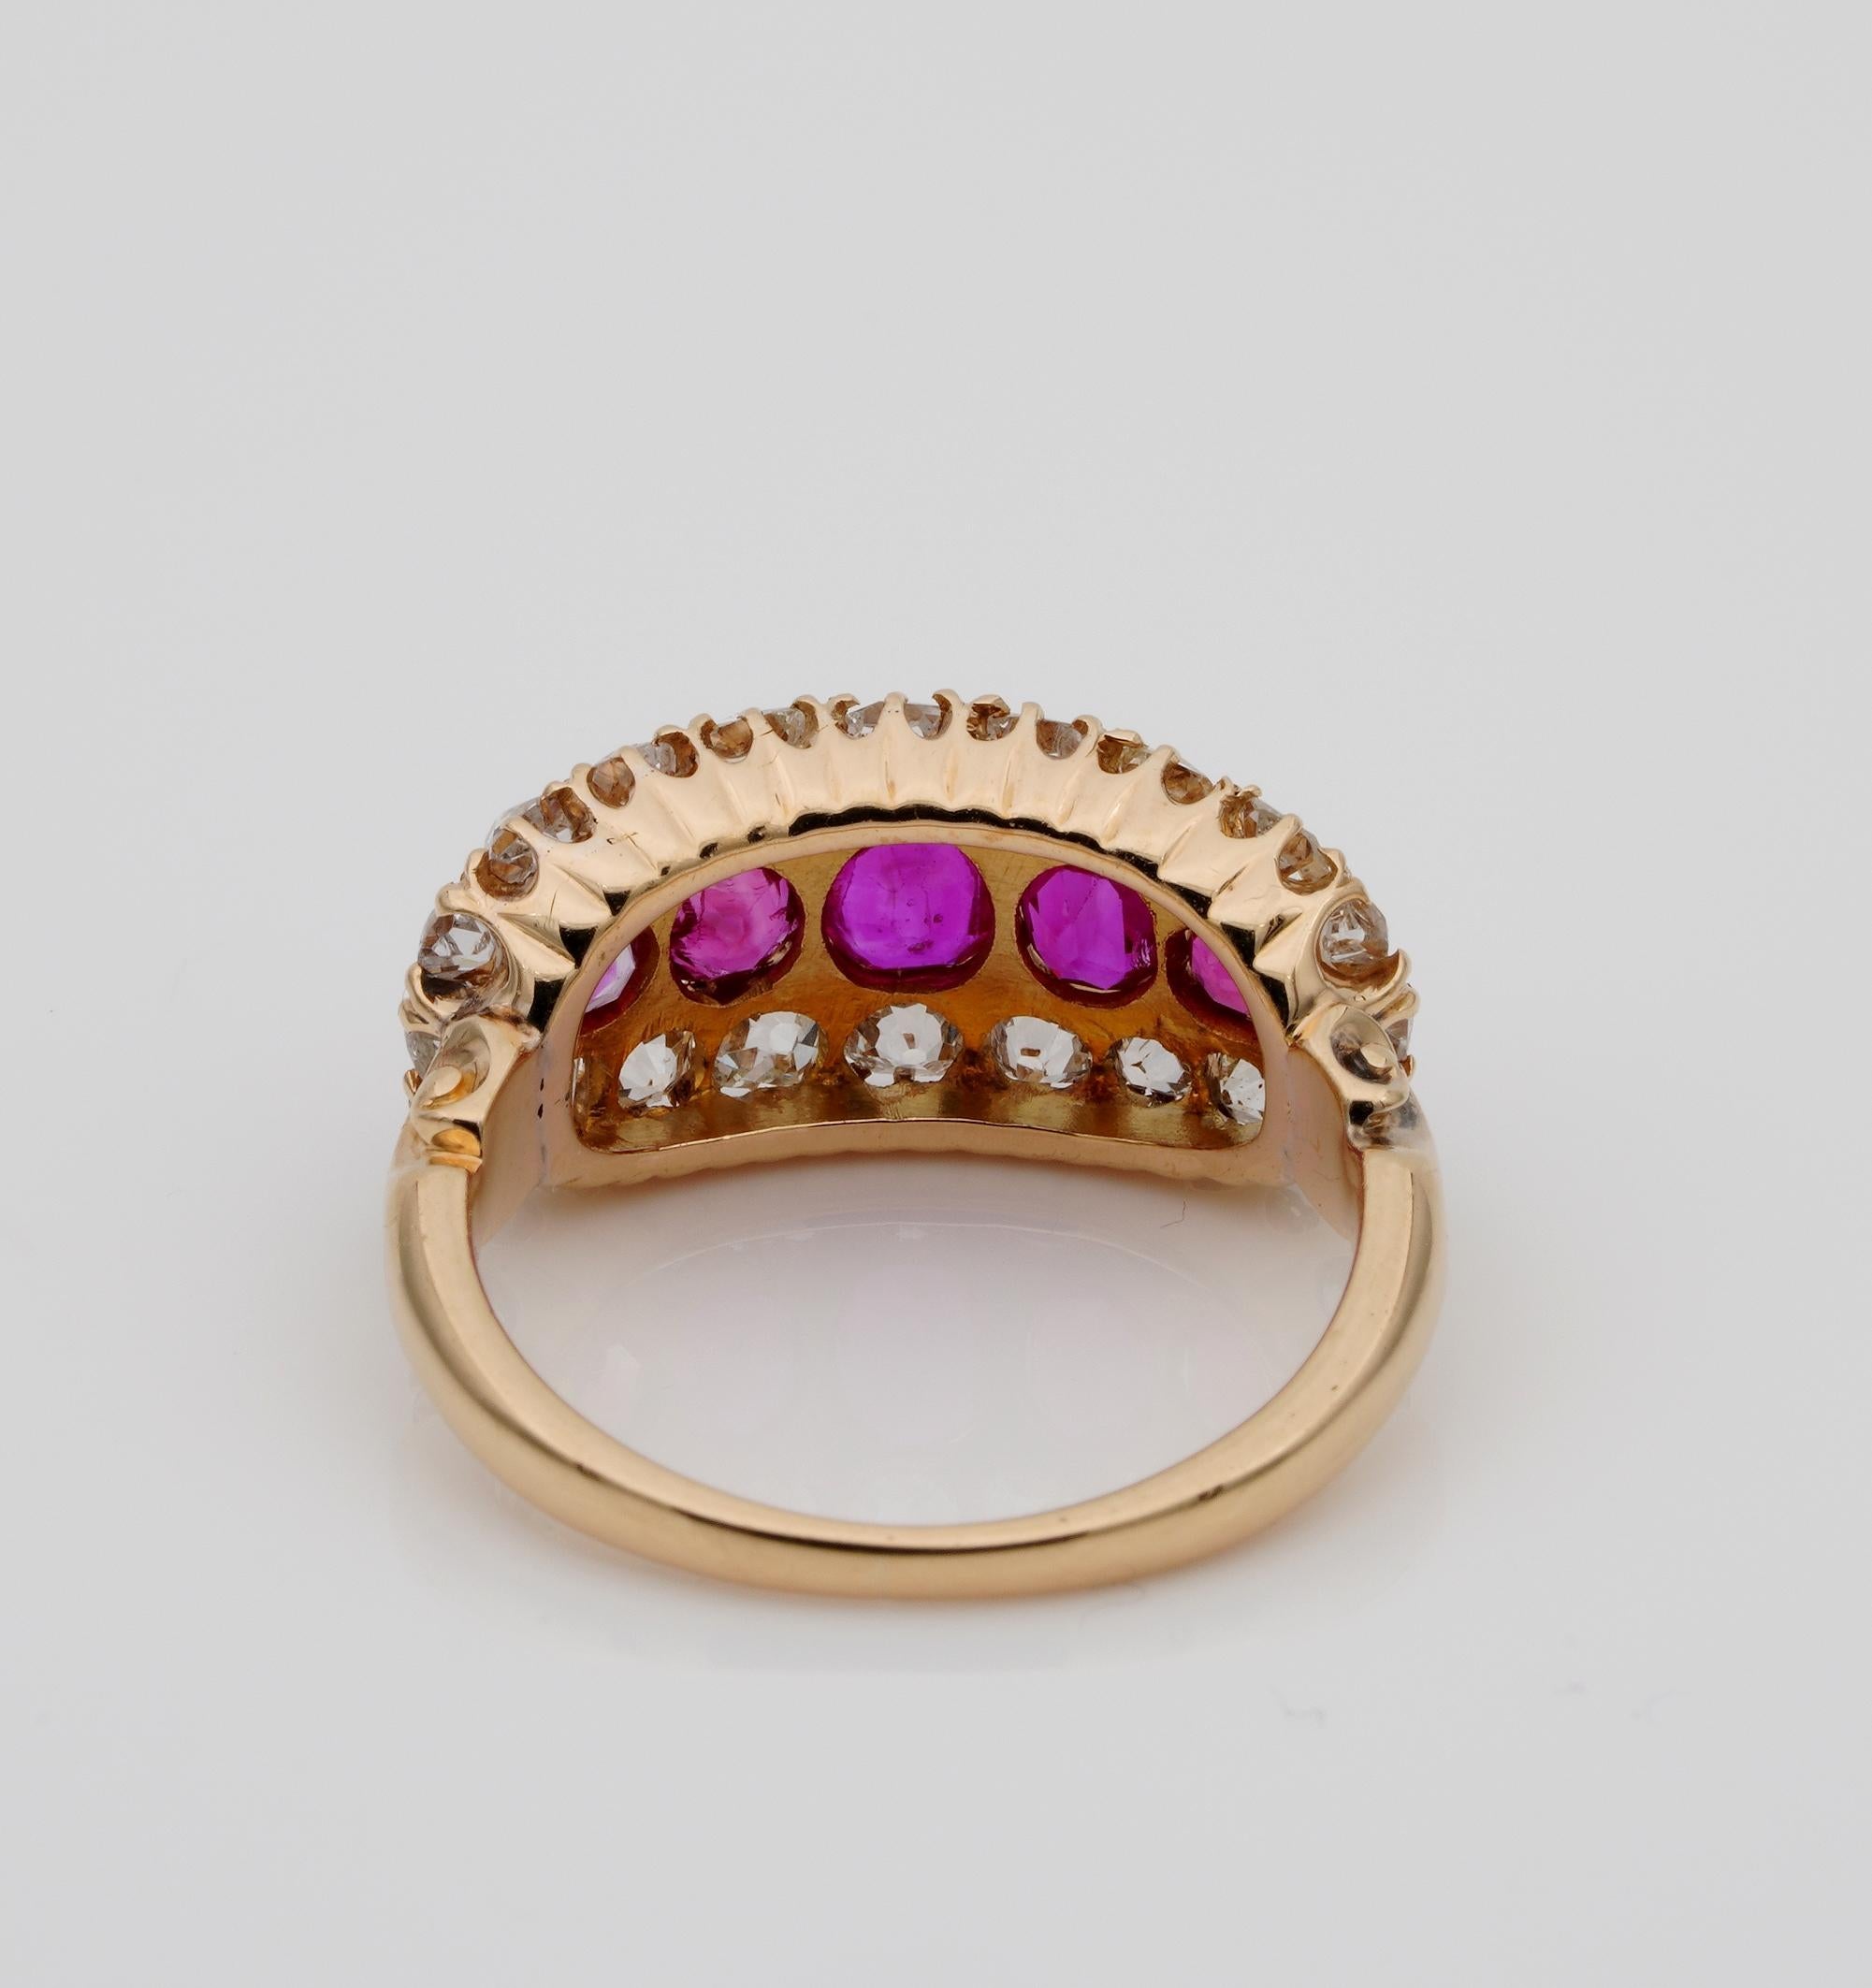 Spectacular Natural Burmese Ruby and Diamond Rare Victorian Ring For Sale 4